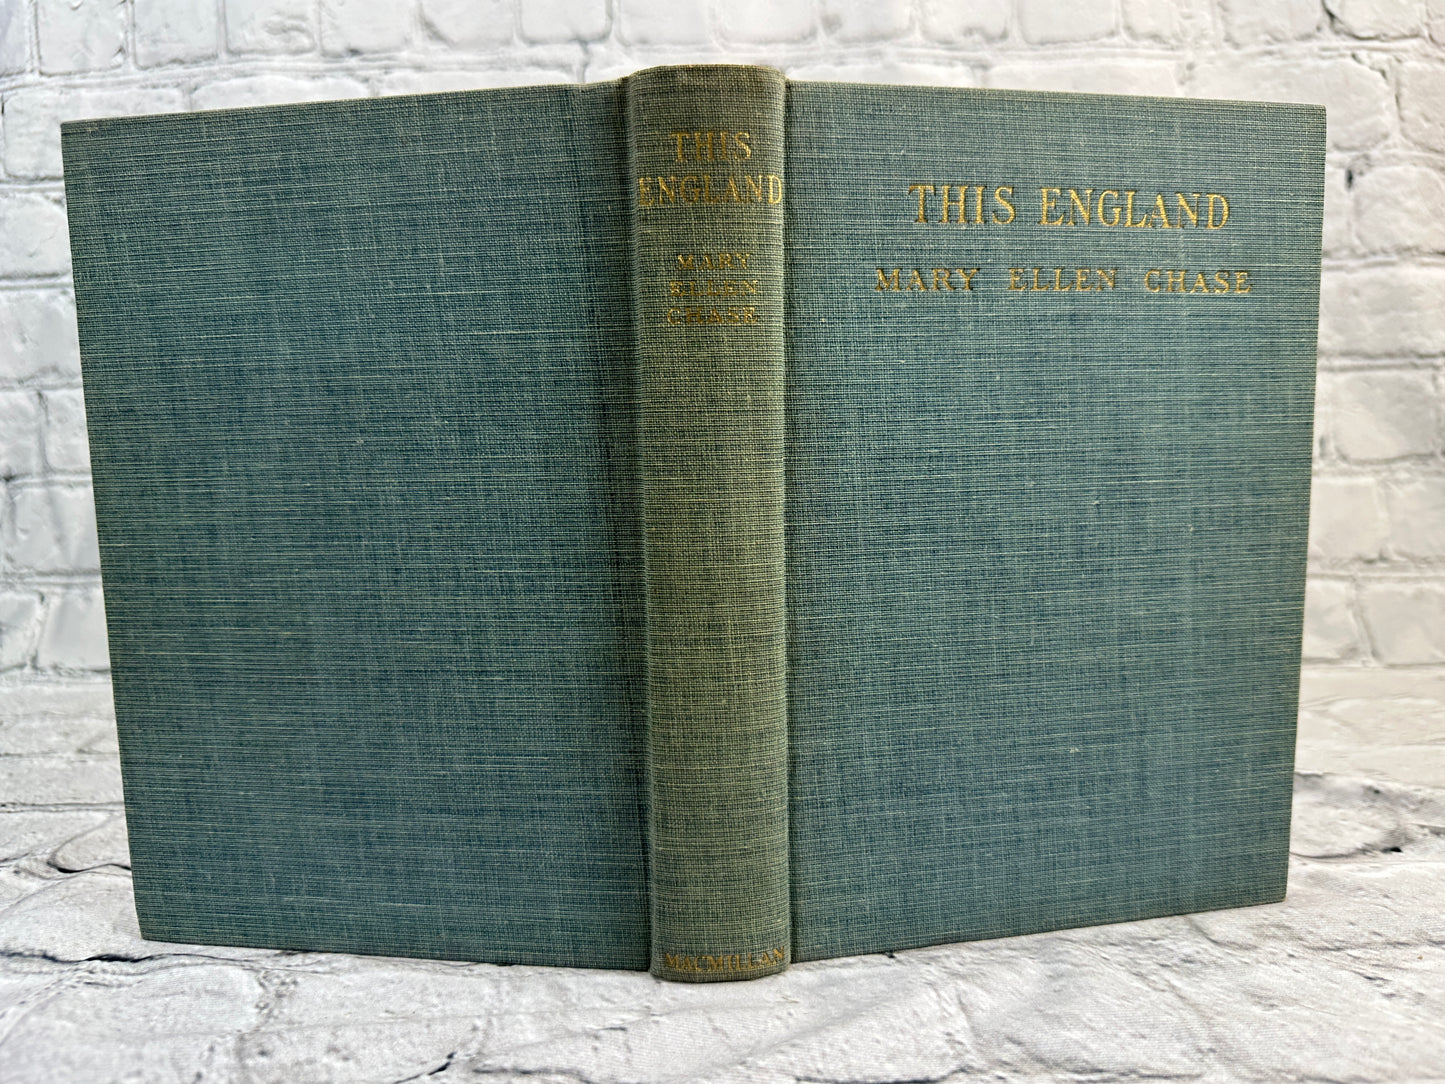 This England By Mary Ellen Chase [1936 · First Edition]